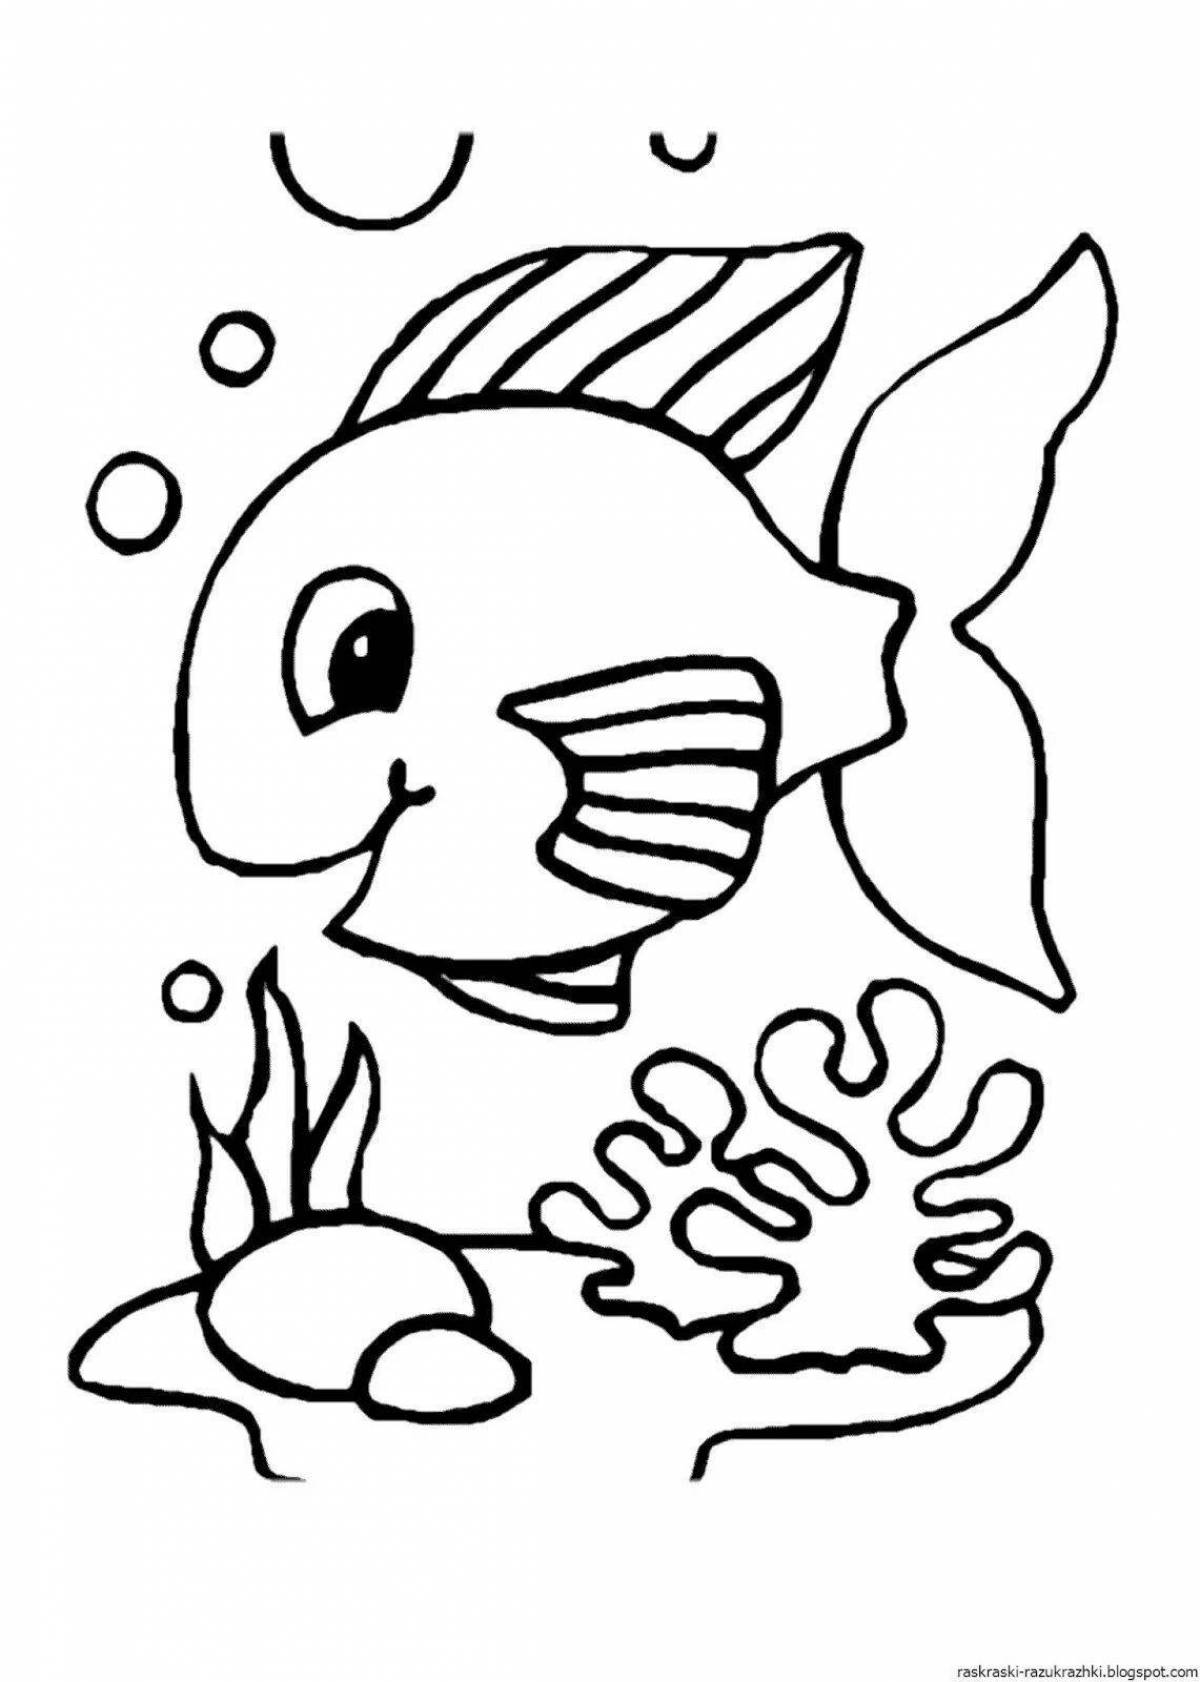 Live fish coloring book for kids